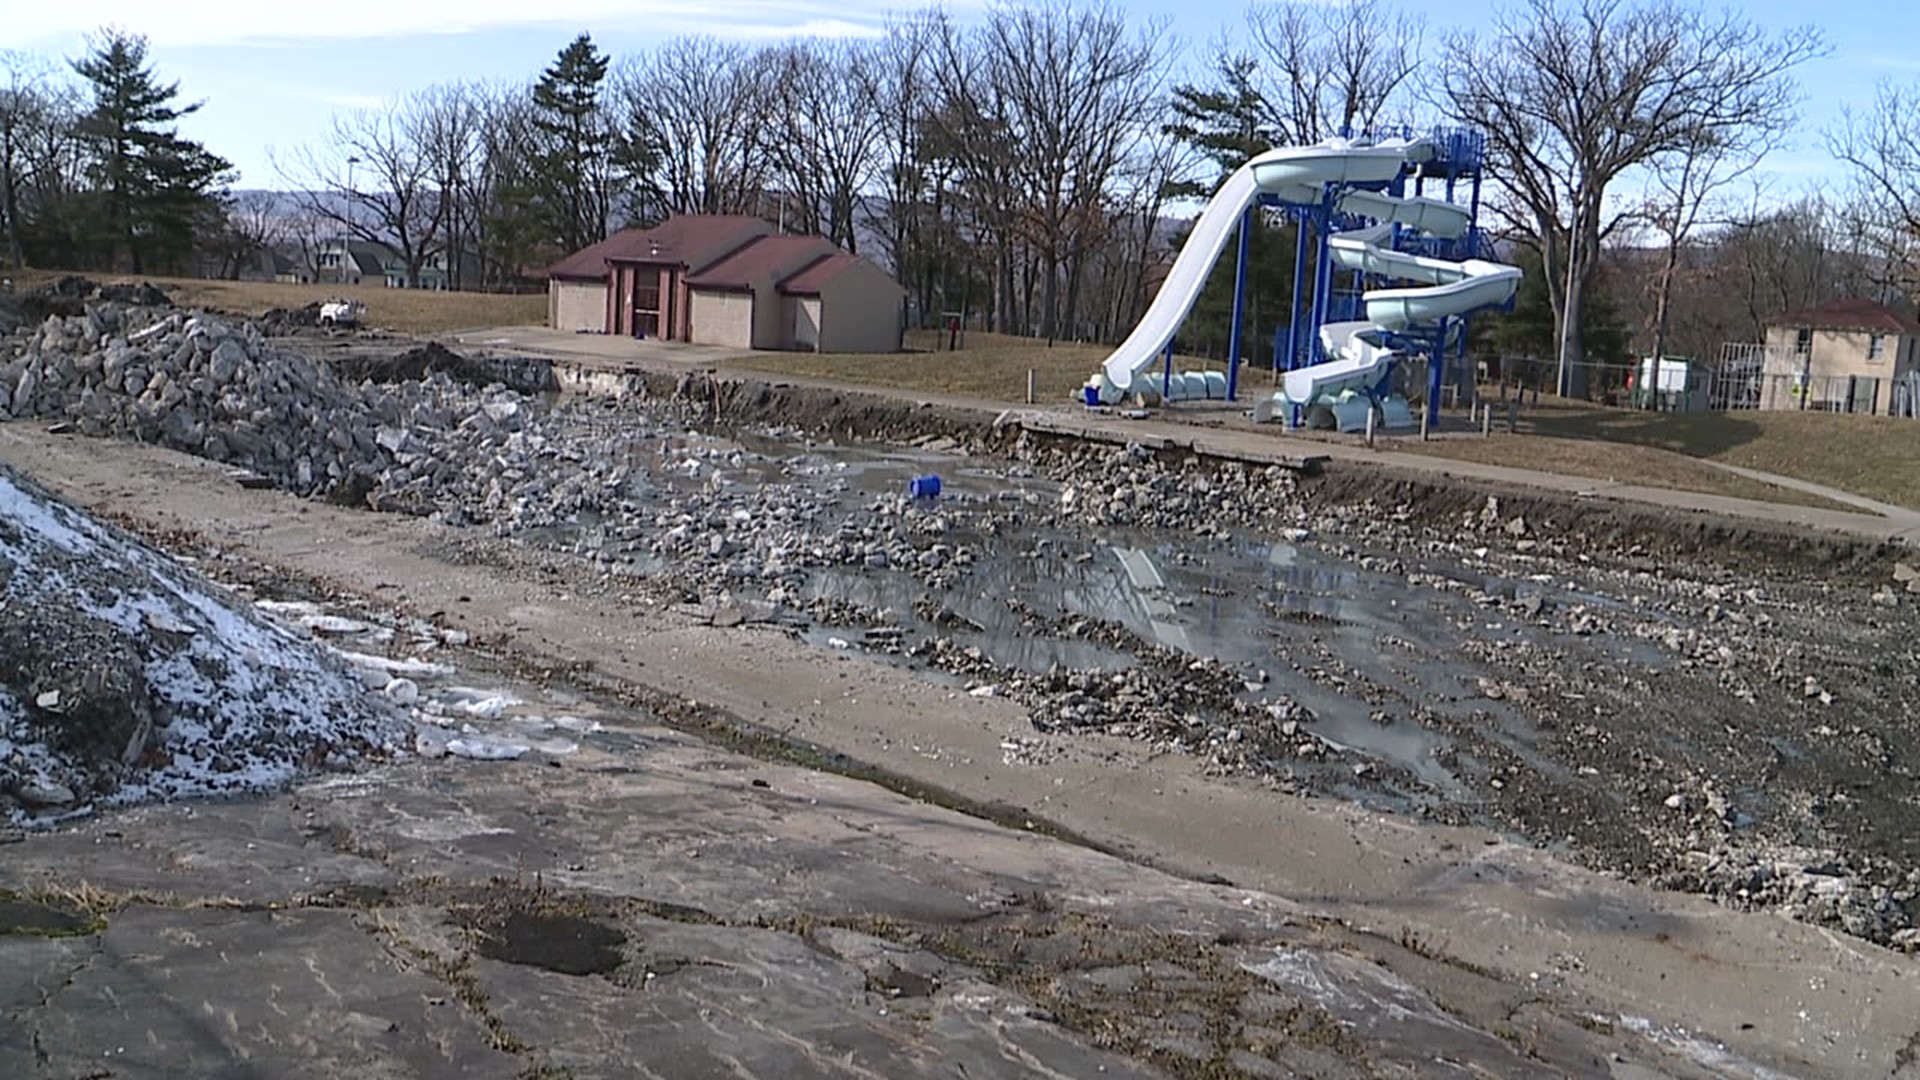 Demolition of the old pool area is almost complete, and city officials are still weighing options for the future of the complex.